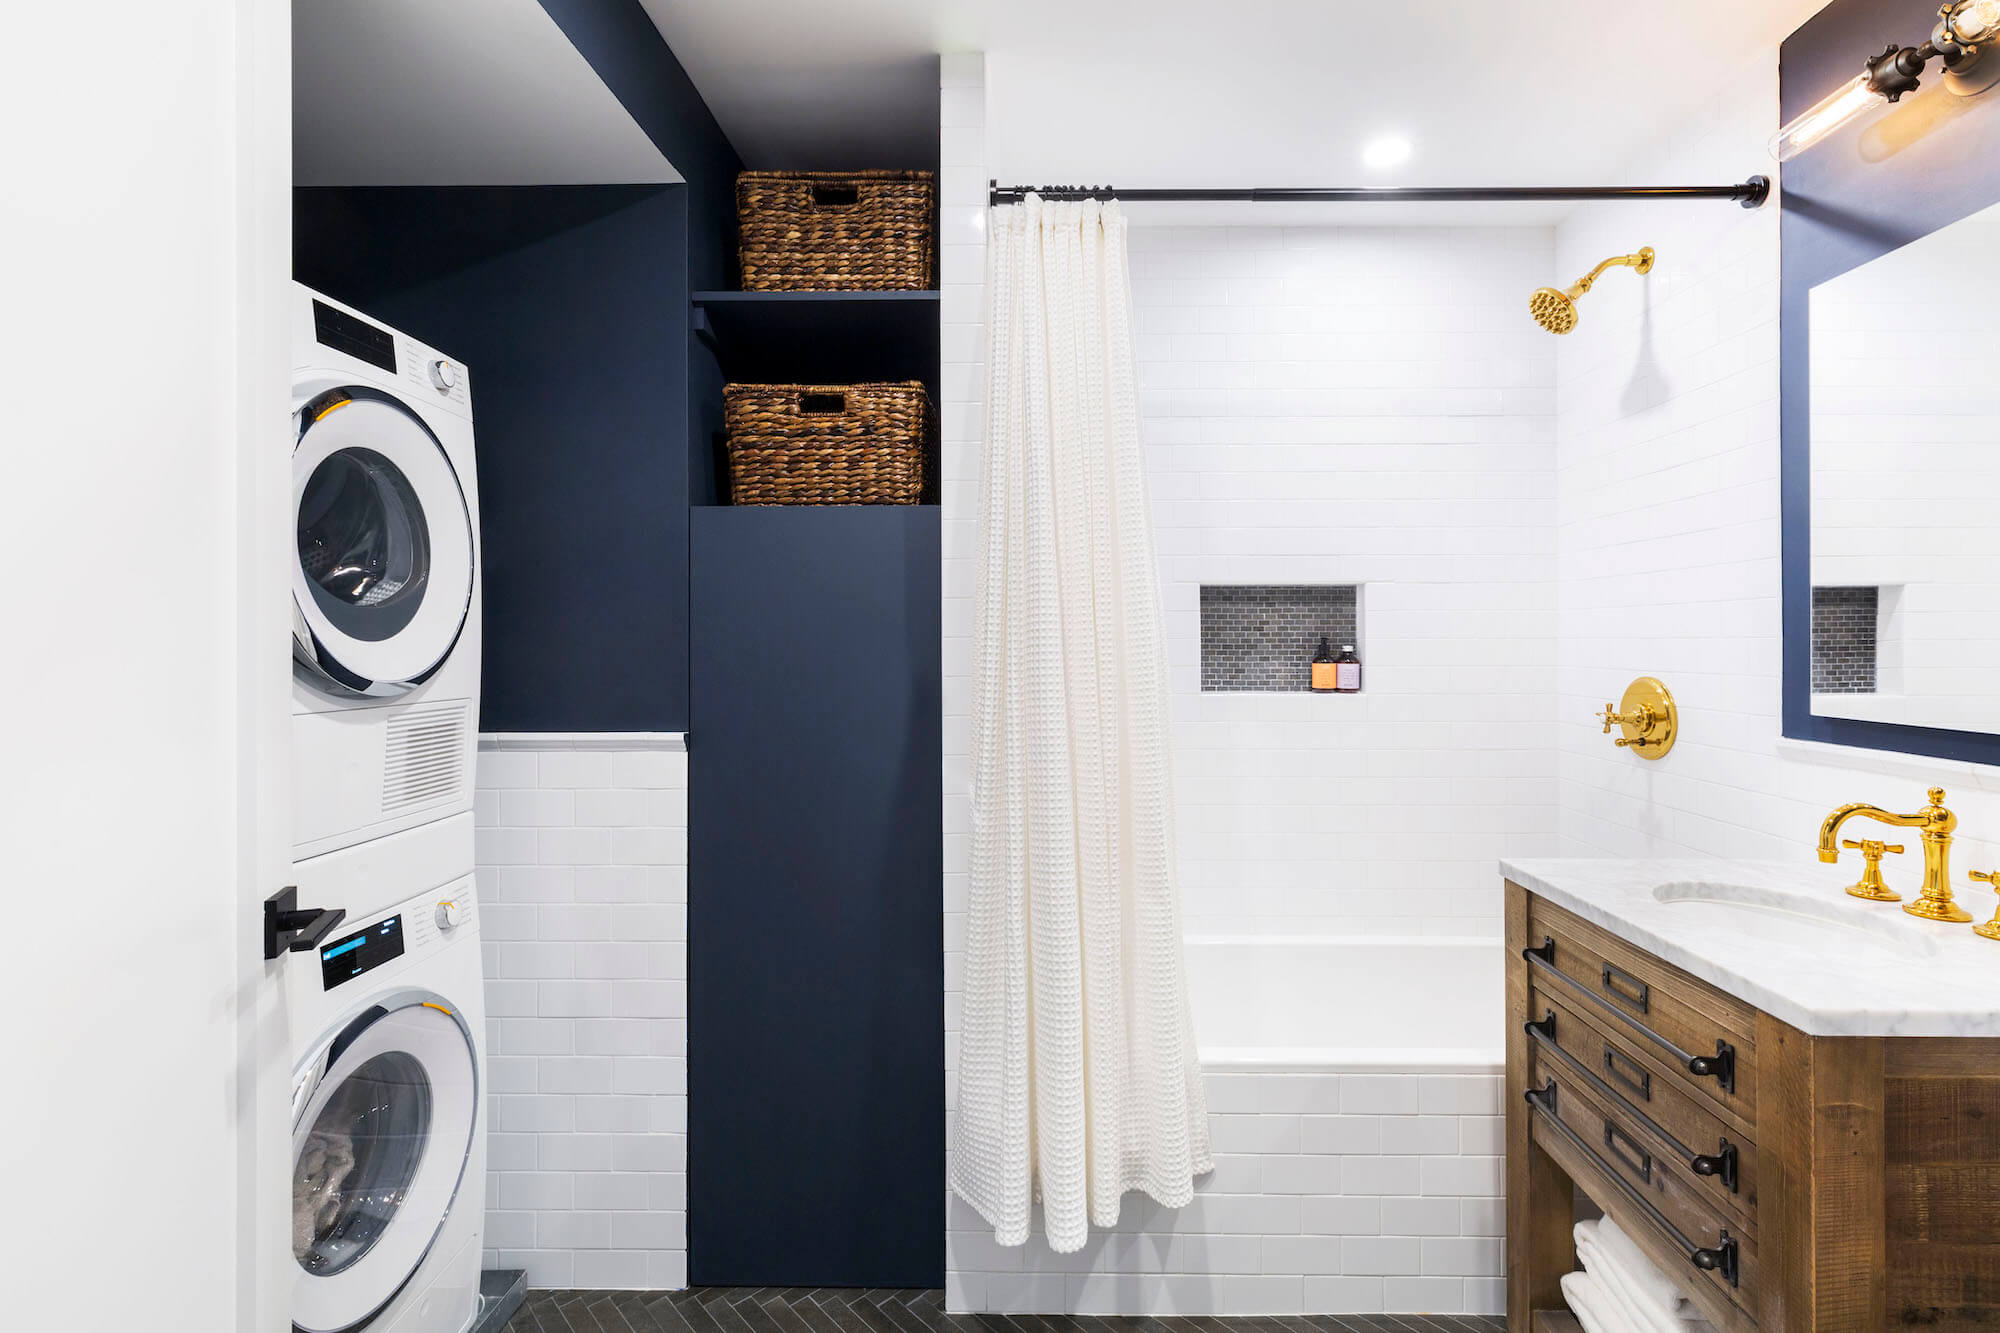 White subway tiles and blue paint in bathroom and laundry niche with washer dryer after renovation